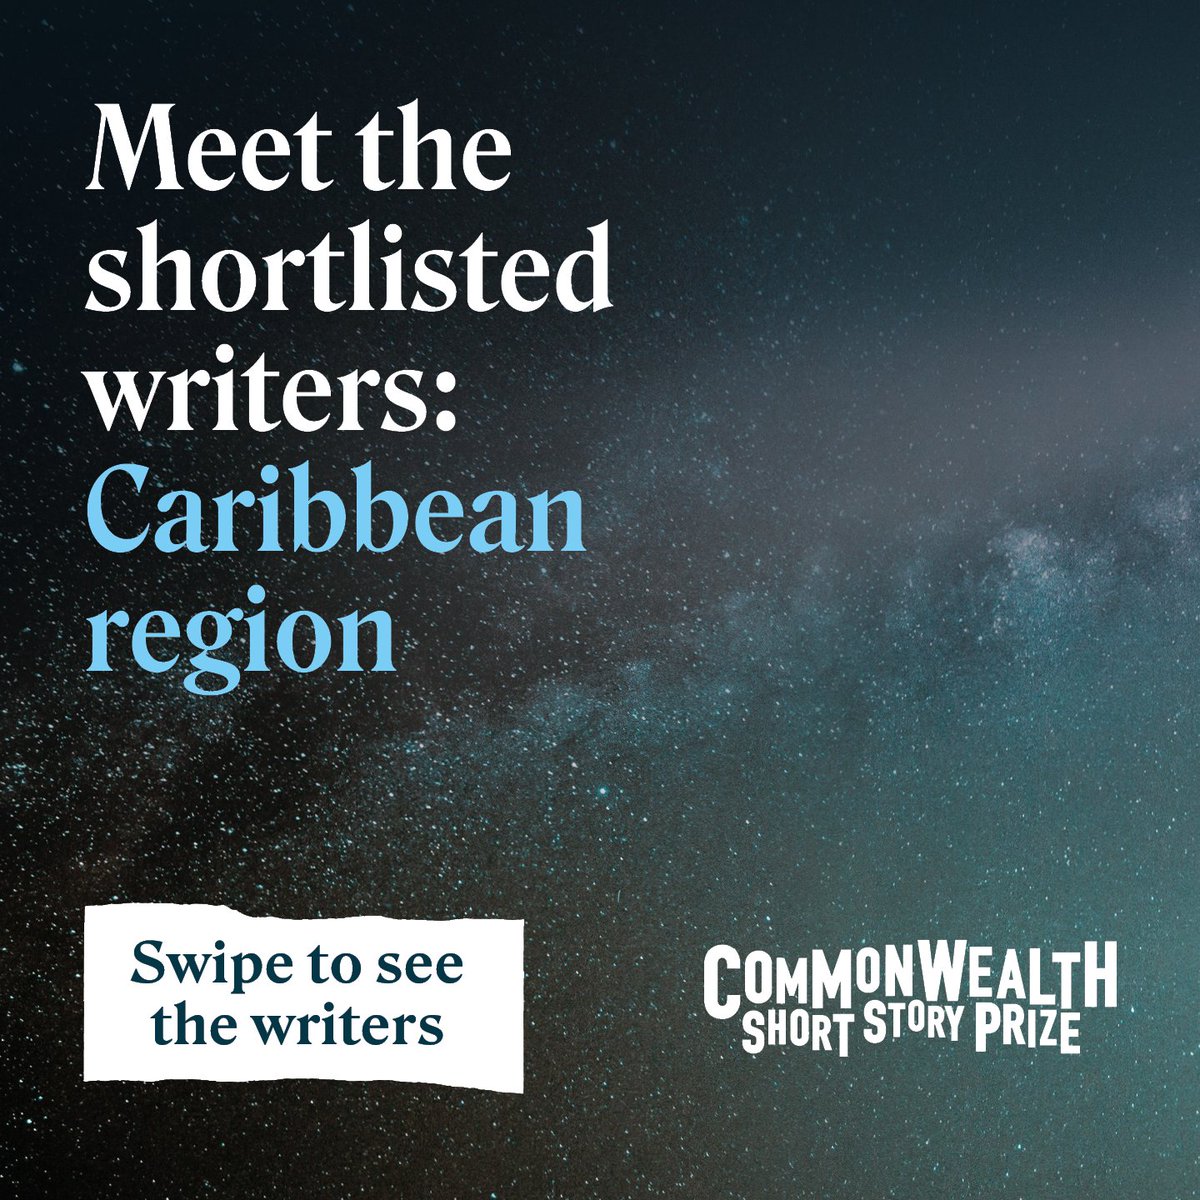 The shortlisted #CWPrize writers from the Caribbean represent Barbados, Saint Kitts and Nevis, and Trinidad and Tobago.

Their experience in law, art, music, and teaching is an important reminder that inspiration for storytelling can be found in all areas of life.

Learn more 👇